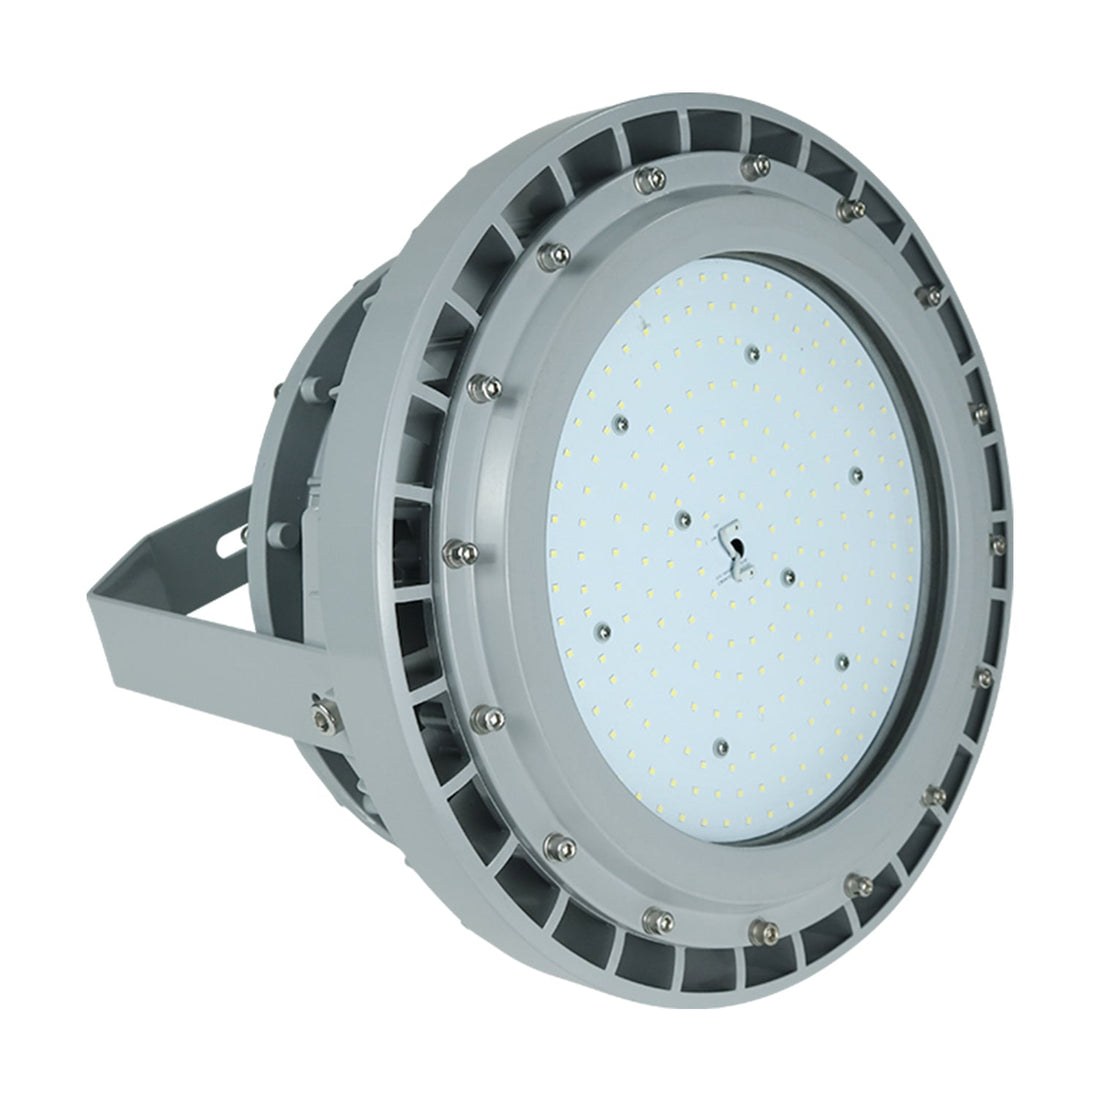 C Series 60W Non-Dimmable LED Explosion Proof Round High Bay Light: Reliable and High-performance Lighting Solution for Hazardous Locations with 8100LM and IP66 Protection, Ideal for Industrial Environments